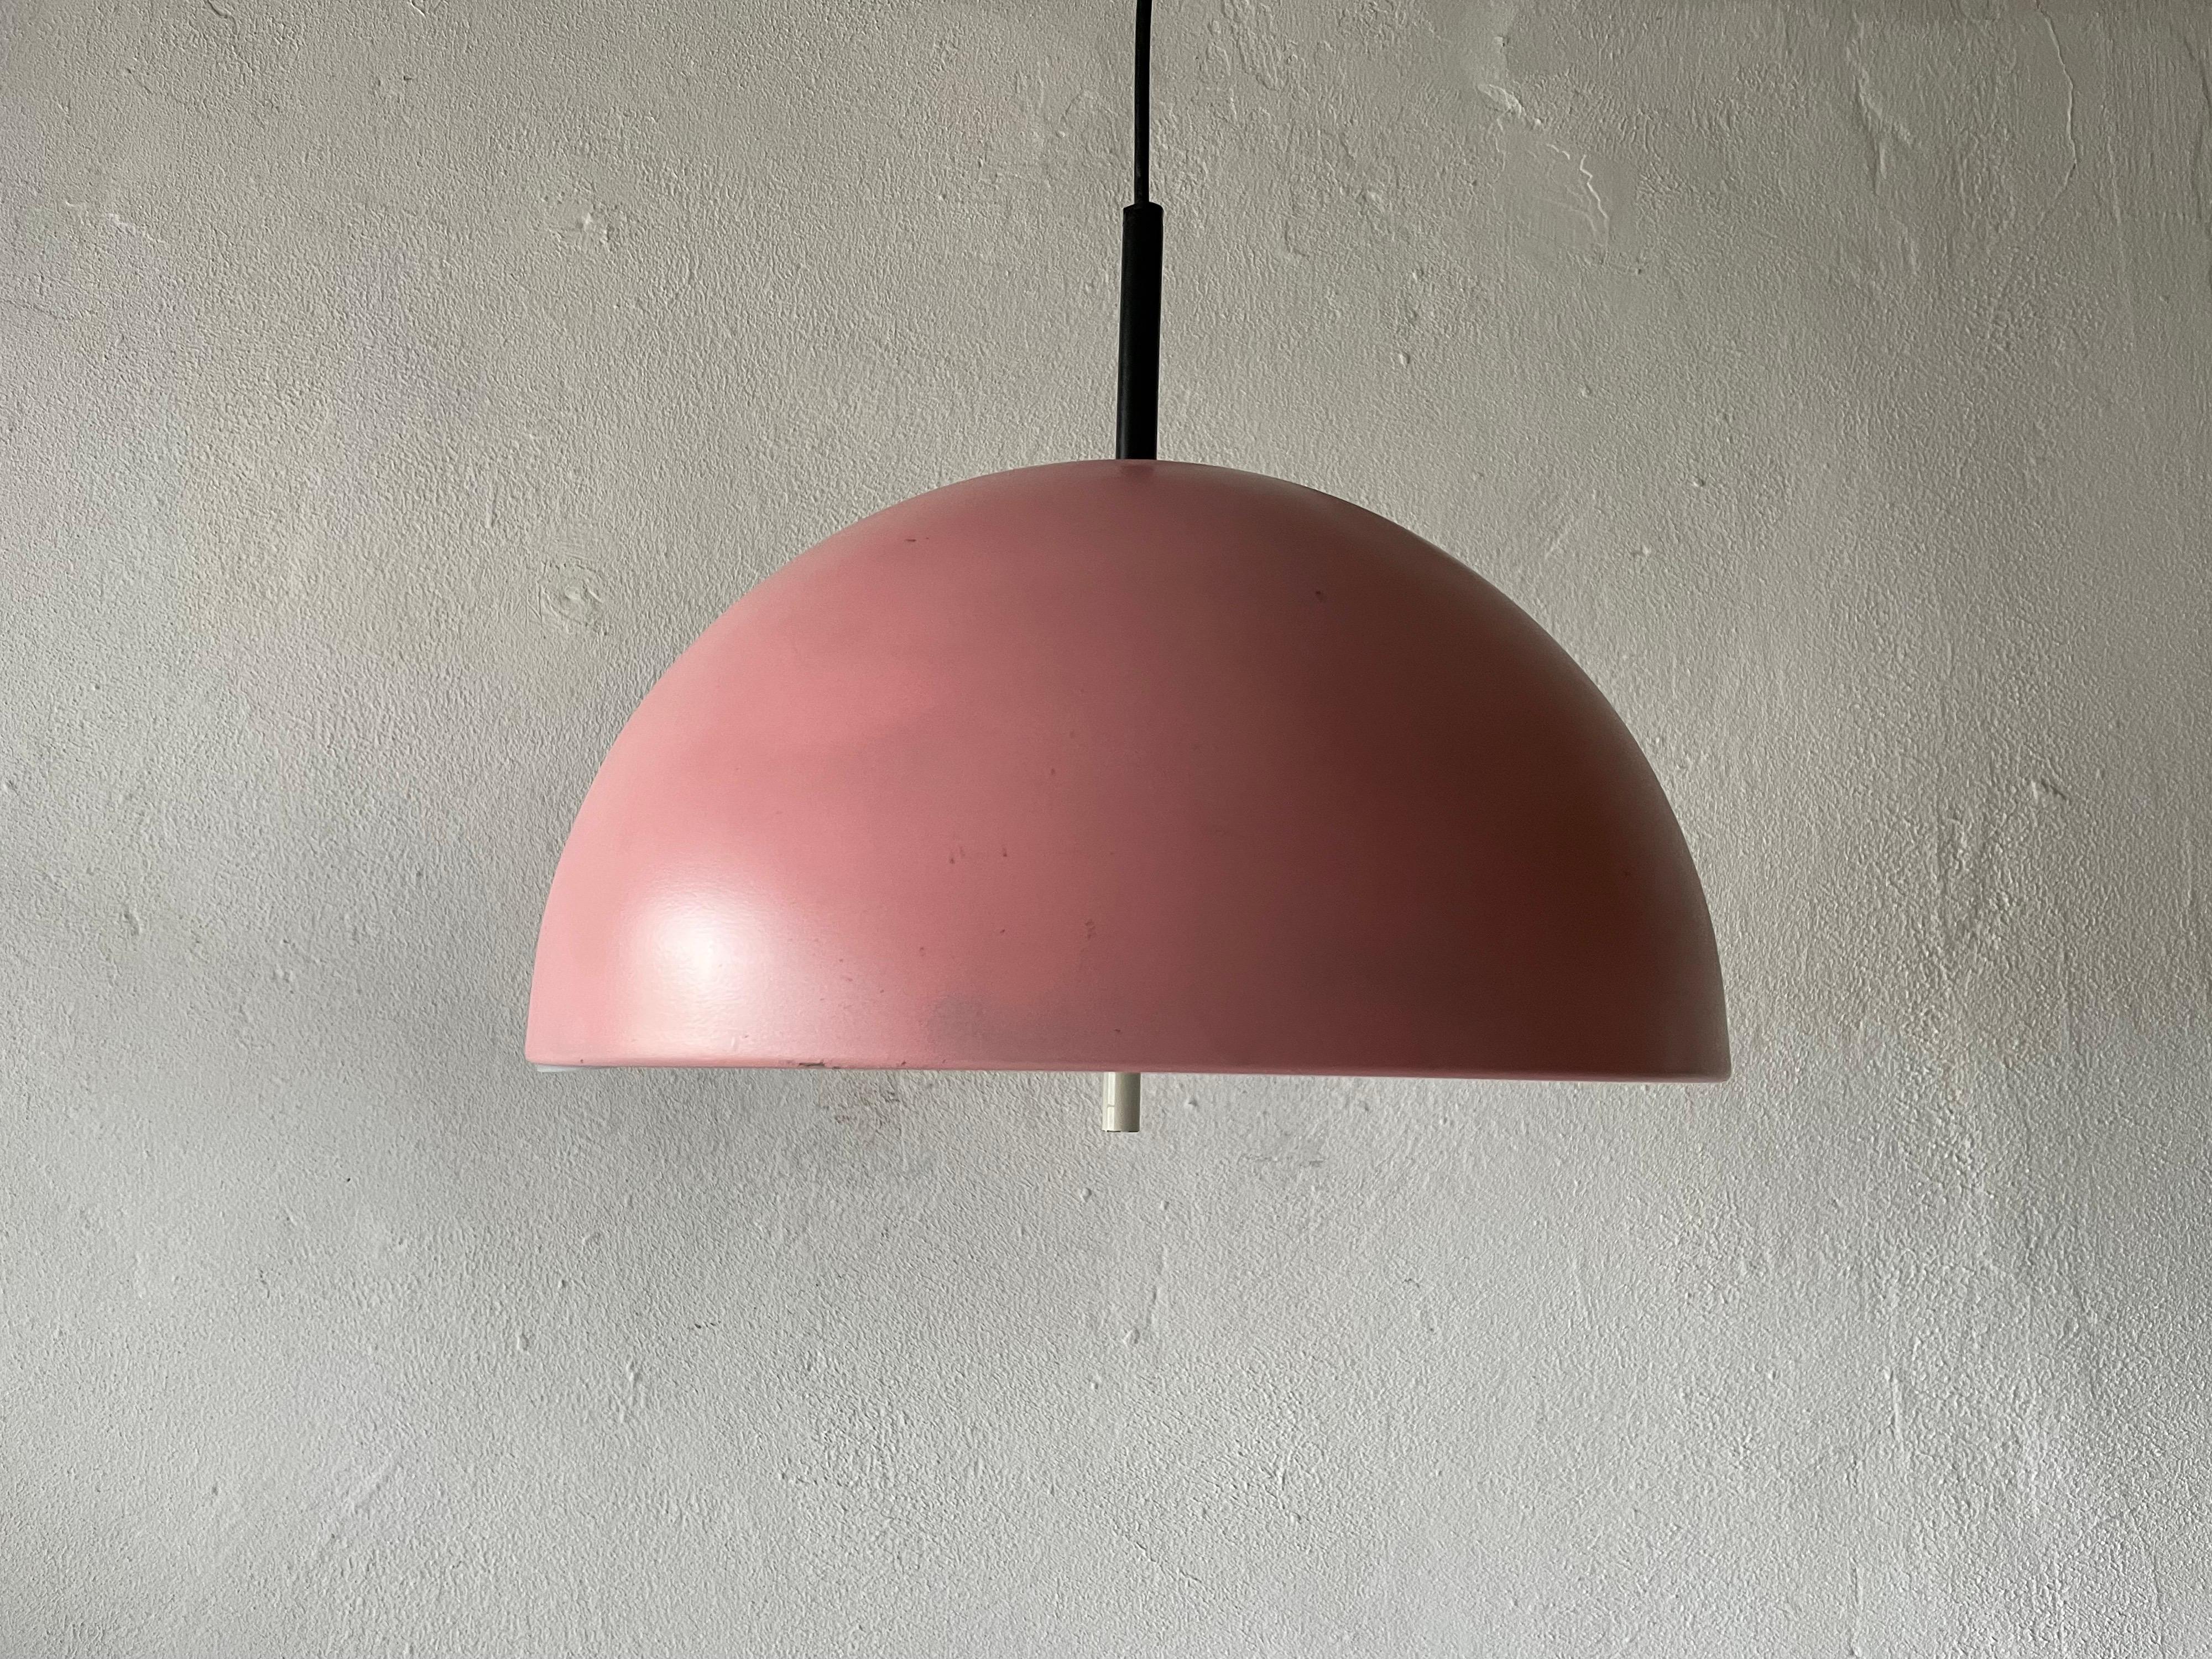 Rare Pink Metal Pendant Lamp by Staff Leuchten, 1970s, Germany For Sale 4